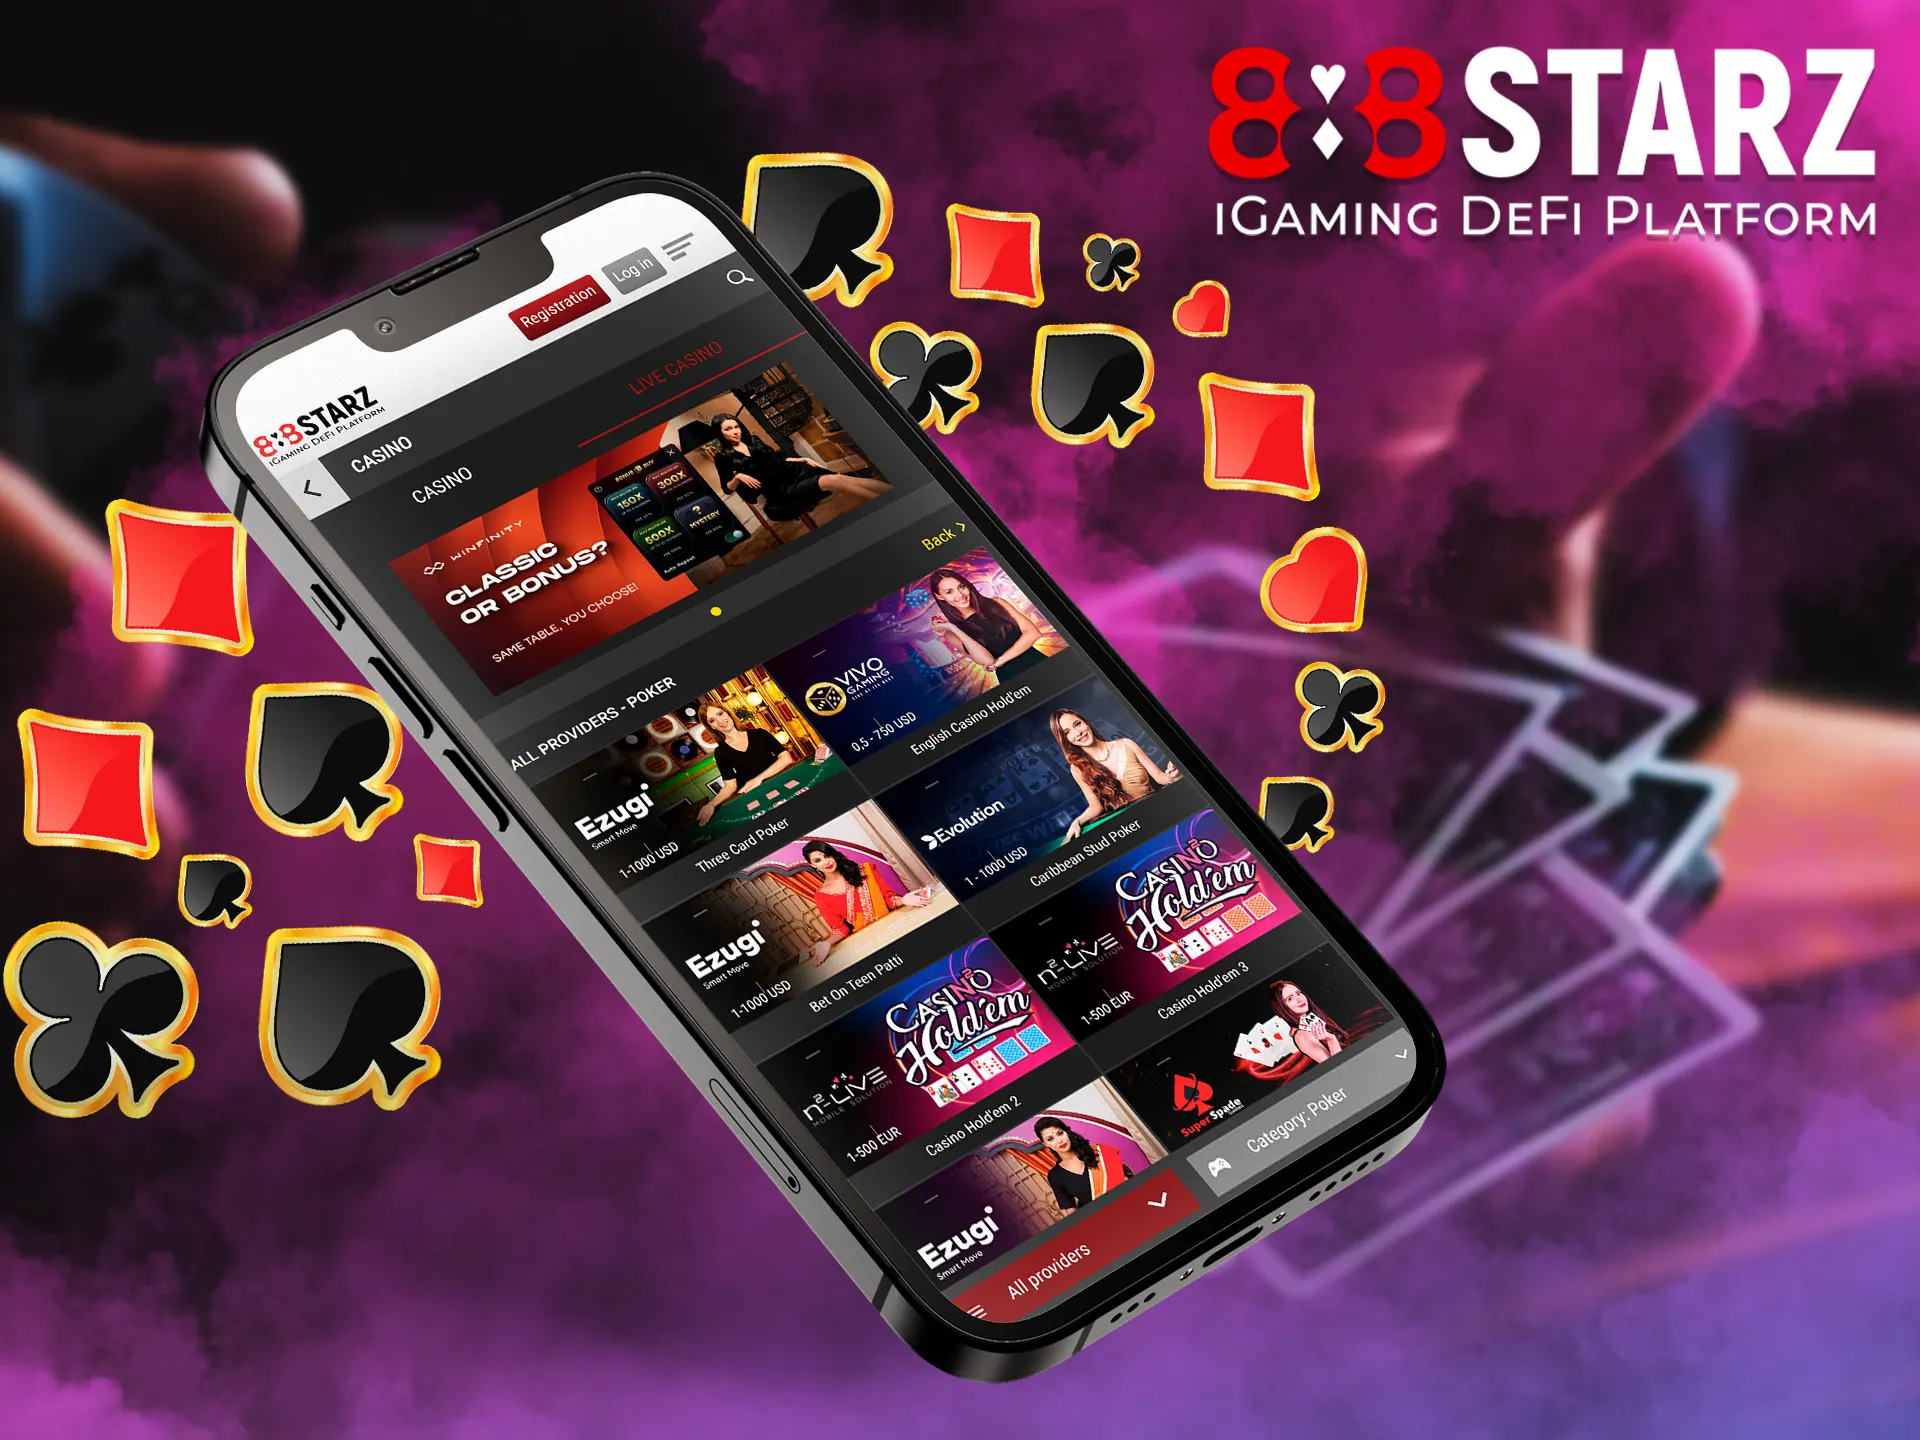 This section is available to play with real and virtual dealers, various card combinations are waiting for players 888starz.